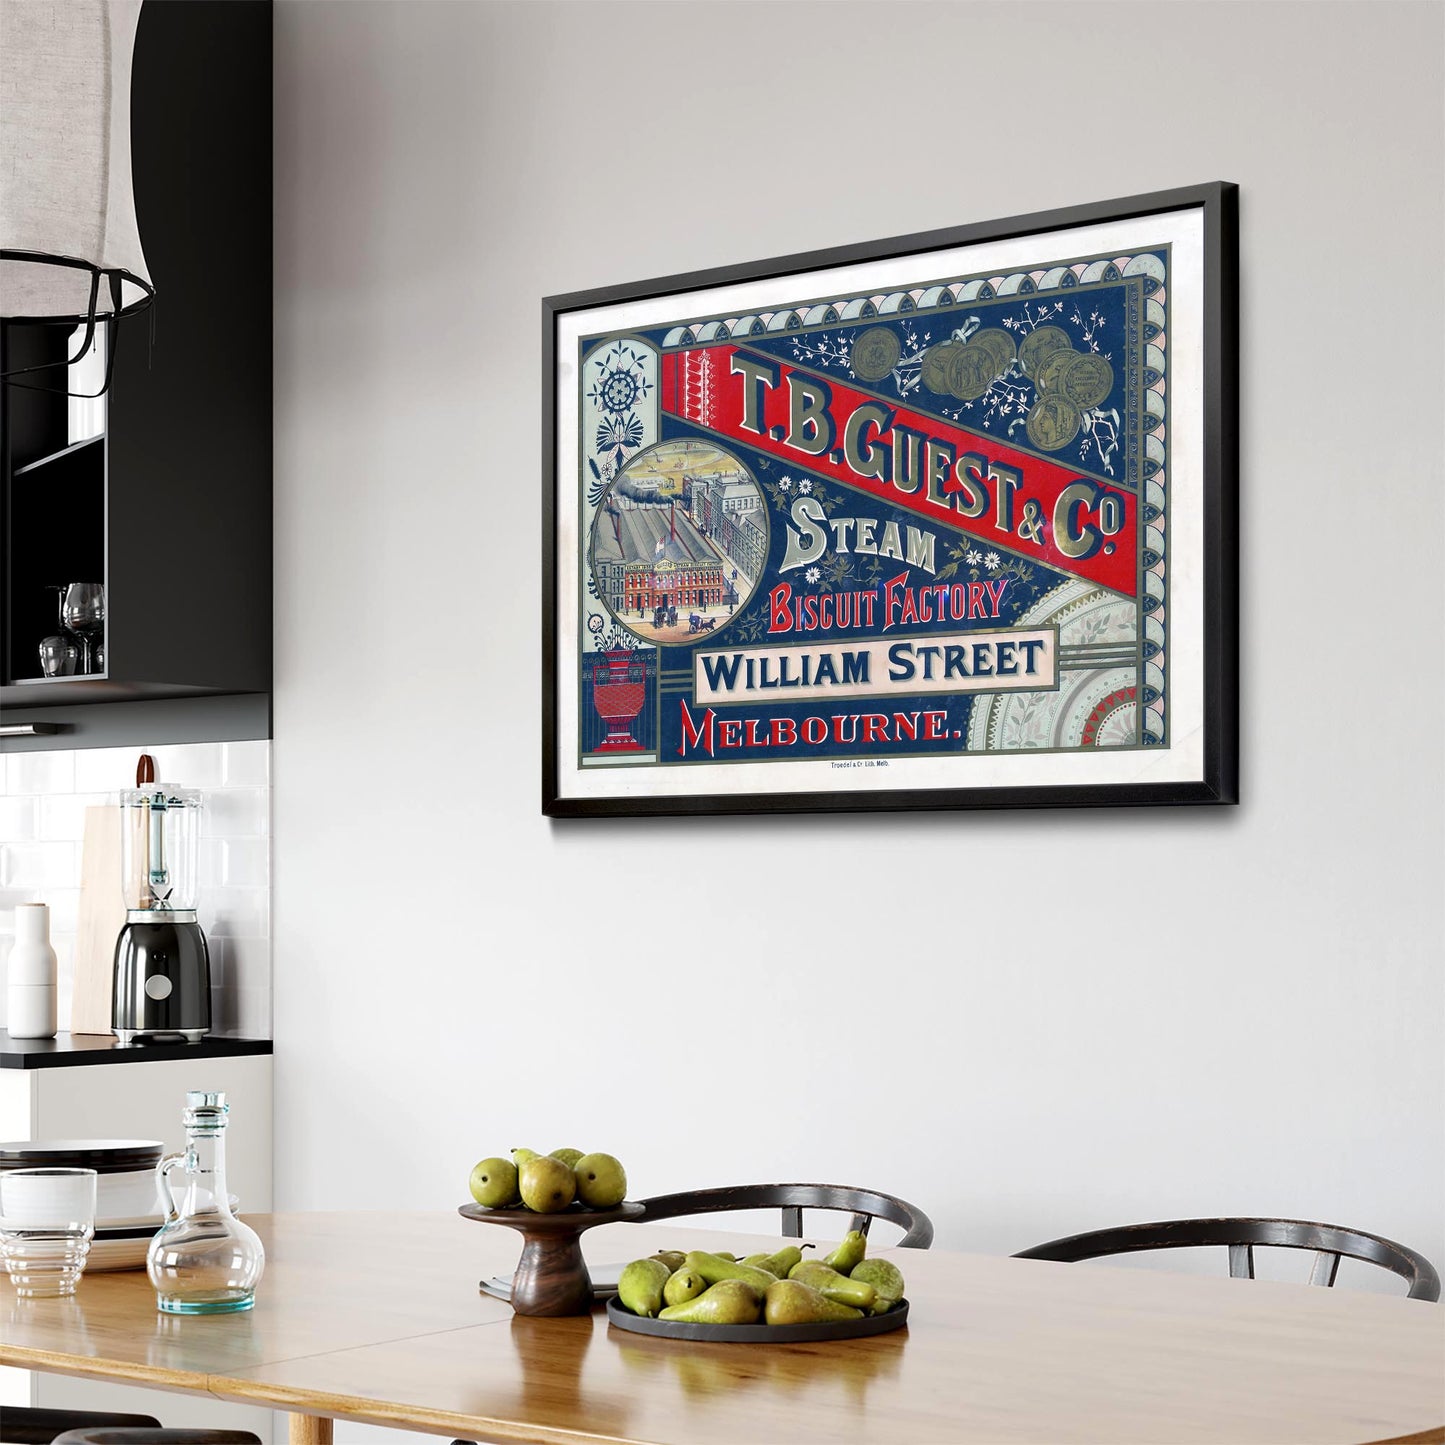 Steam Biscuit Factory Melbourne Vintage Wall Art #2 - The Affordable Art Company